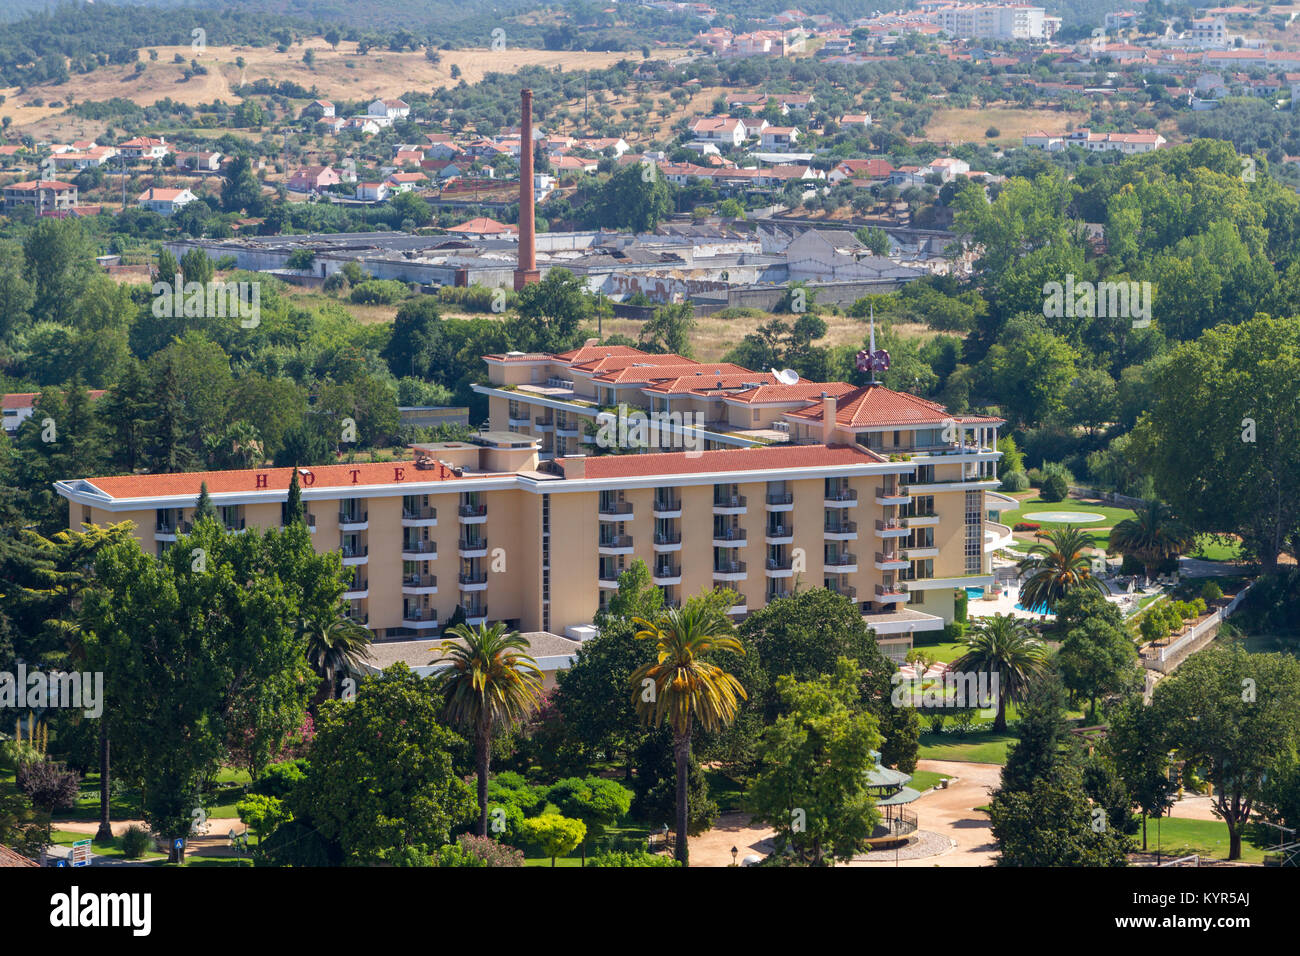 View of Hotel of Tomar, Portugal Stock Photo